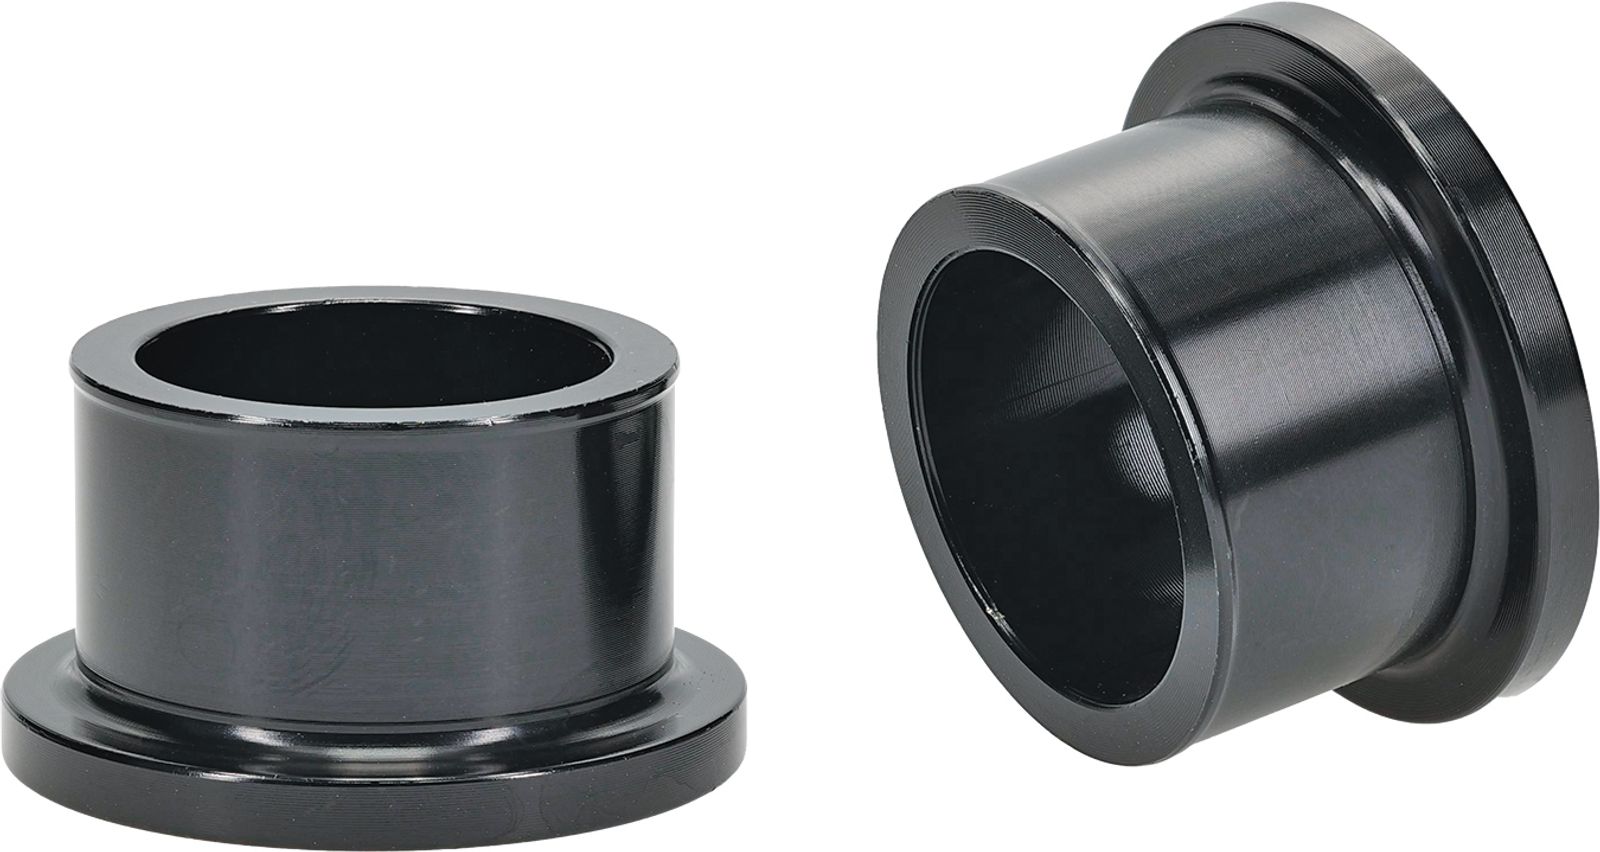 Wrp Rear Wheel Spacer Kits - WRP111051-1 image